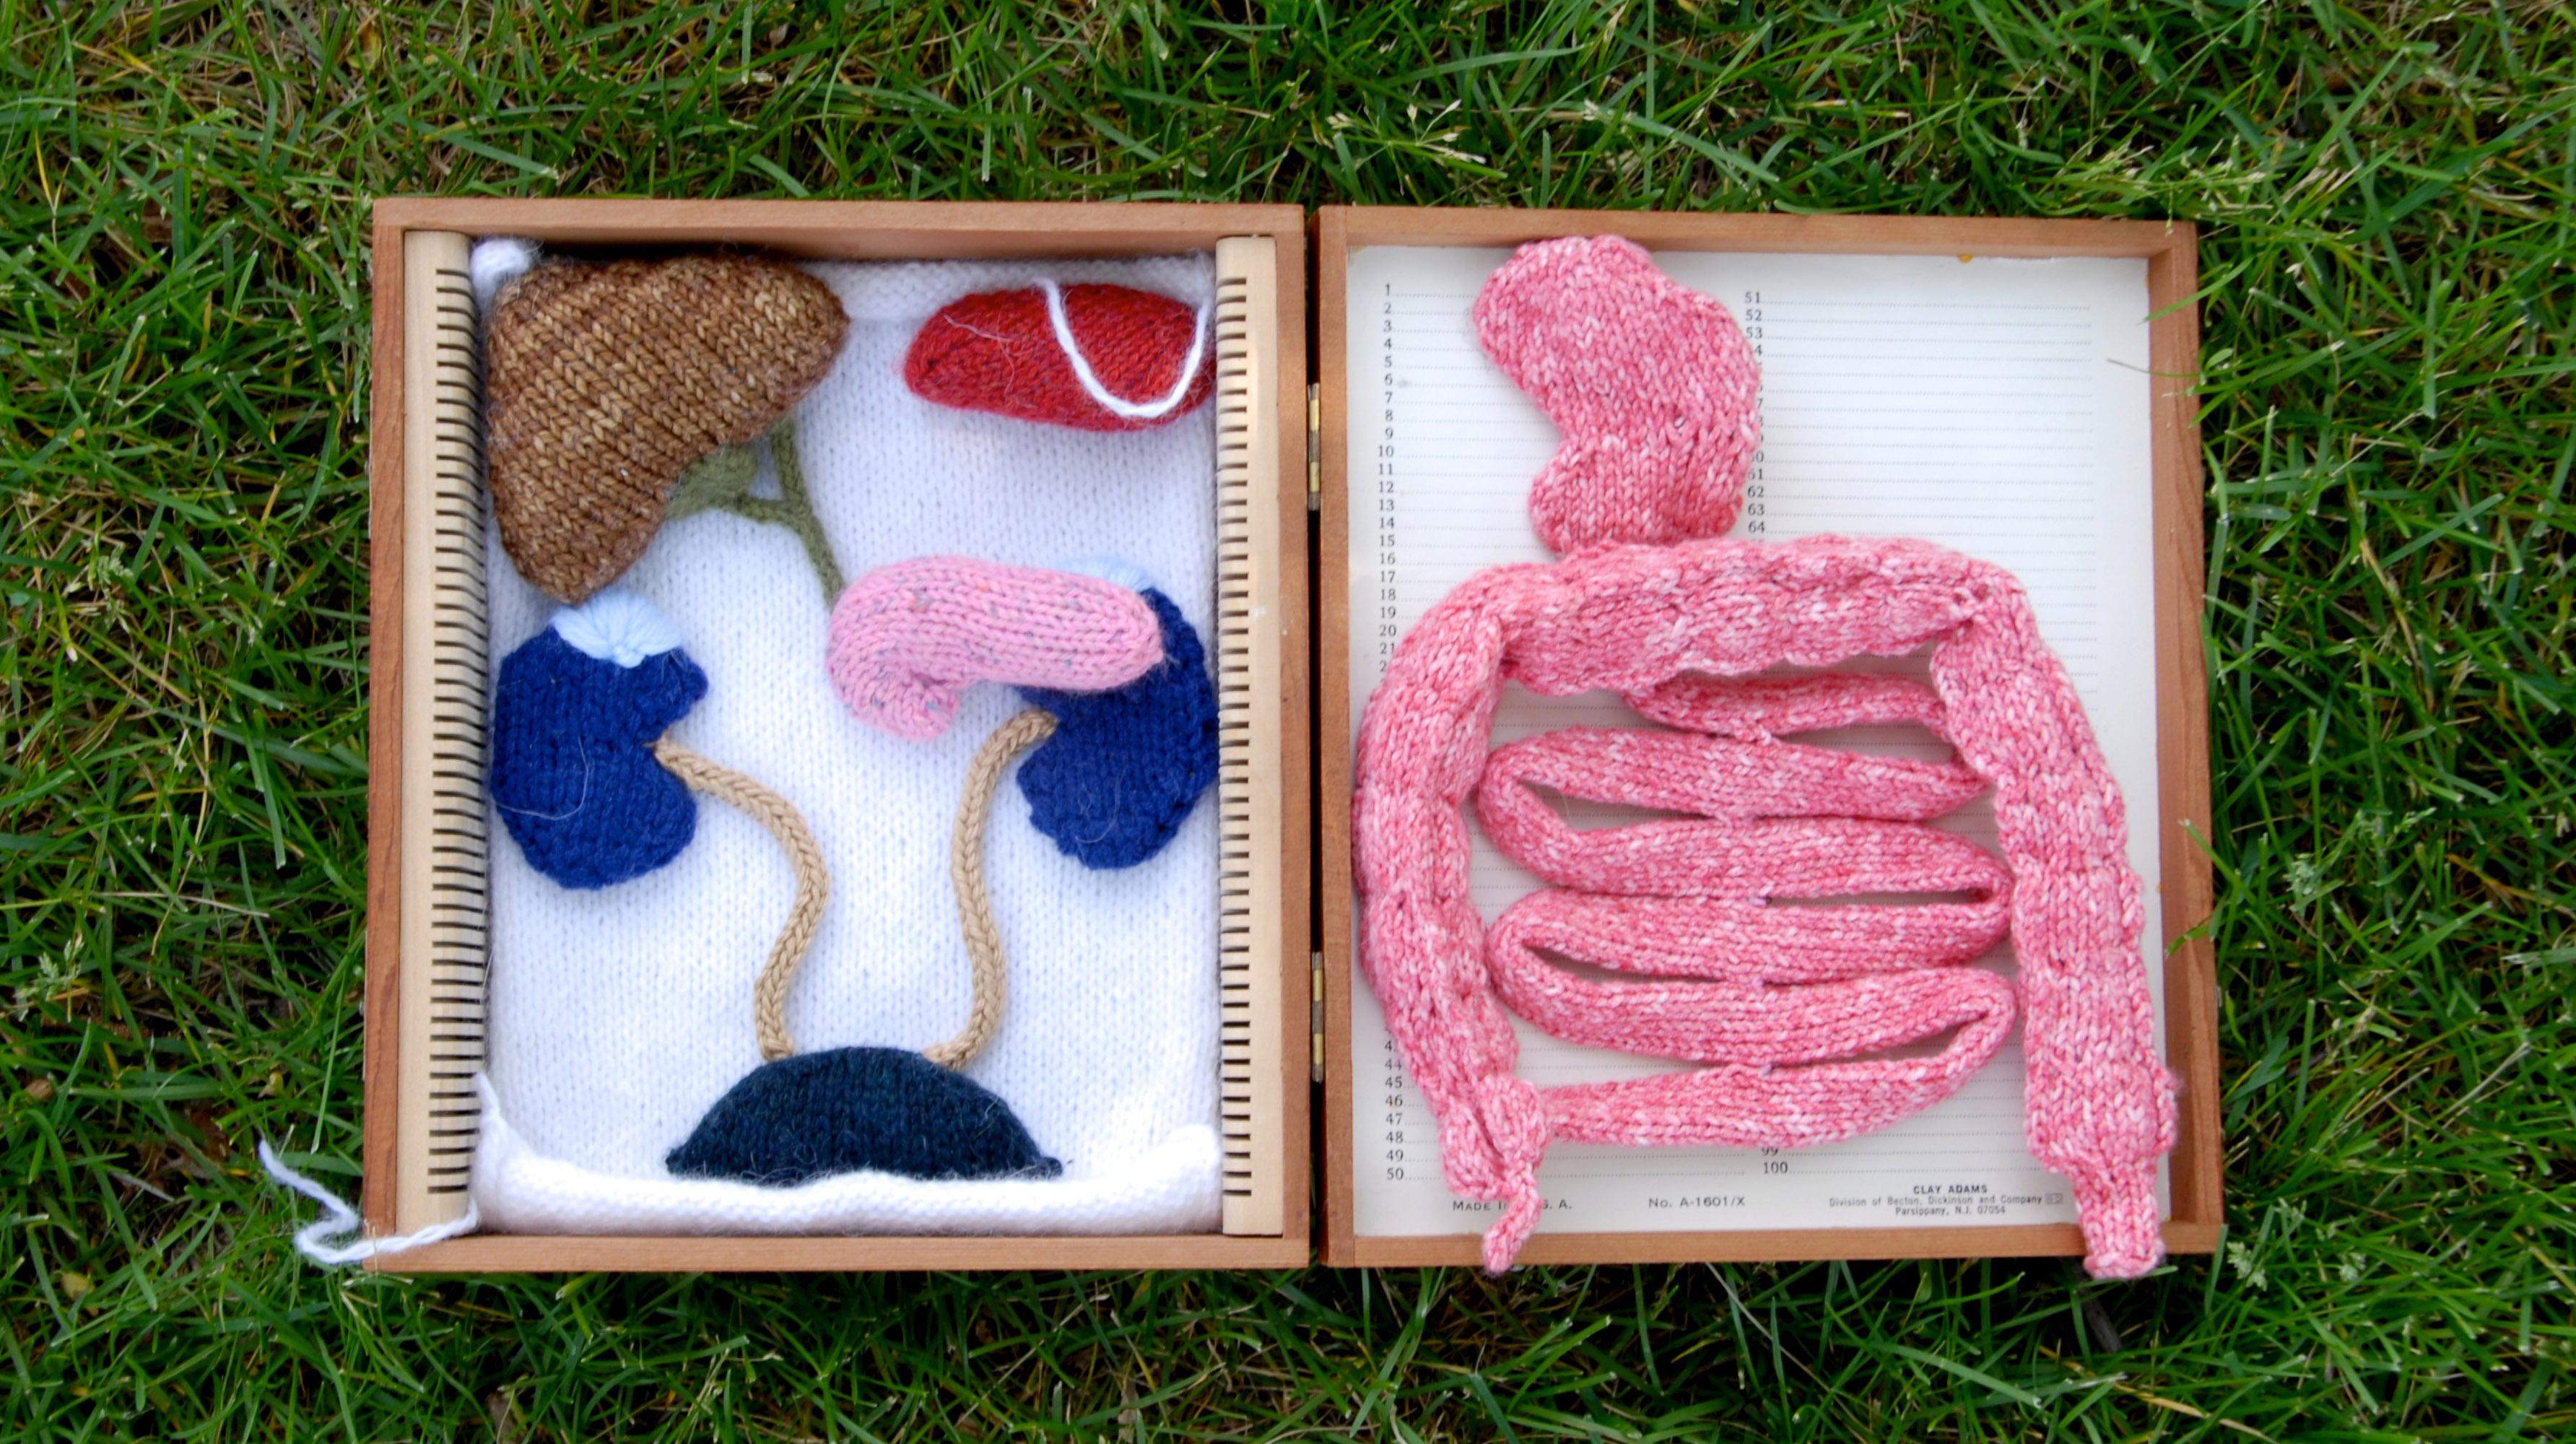 Knitted models of intra-abdominal organs. (Courtesy of Daniel Lam)